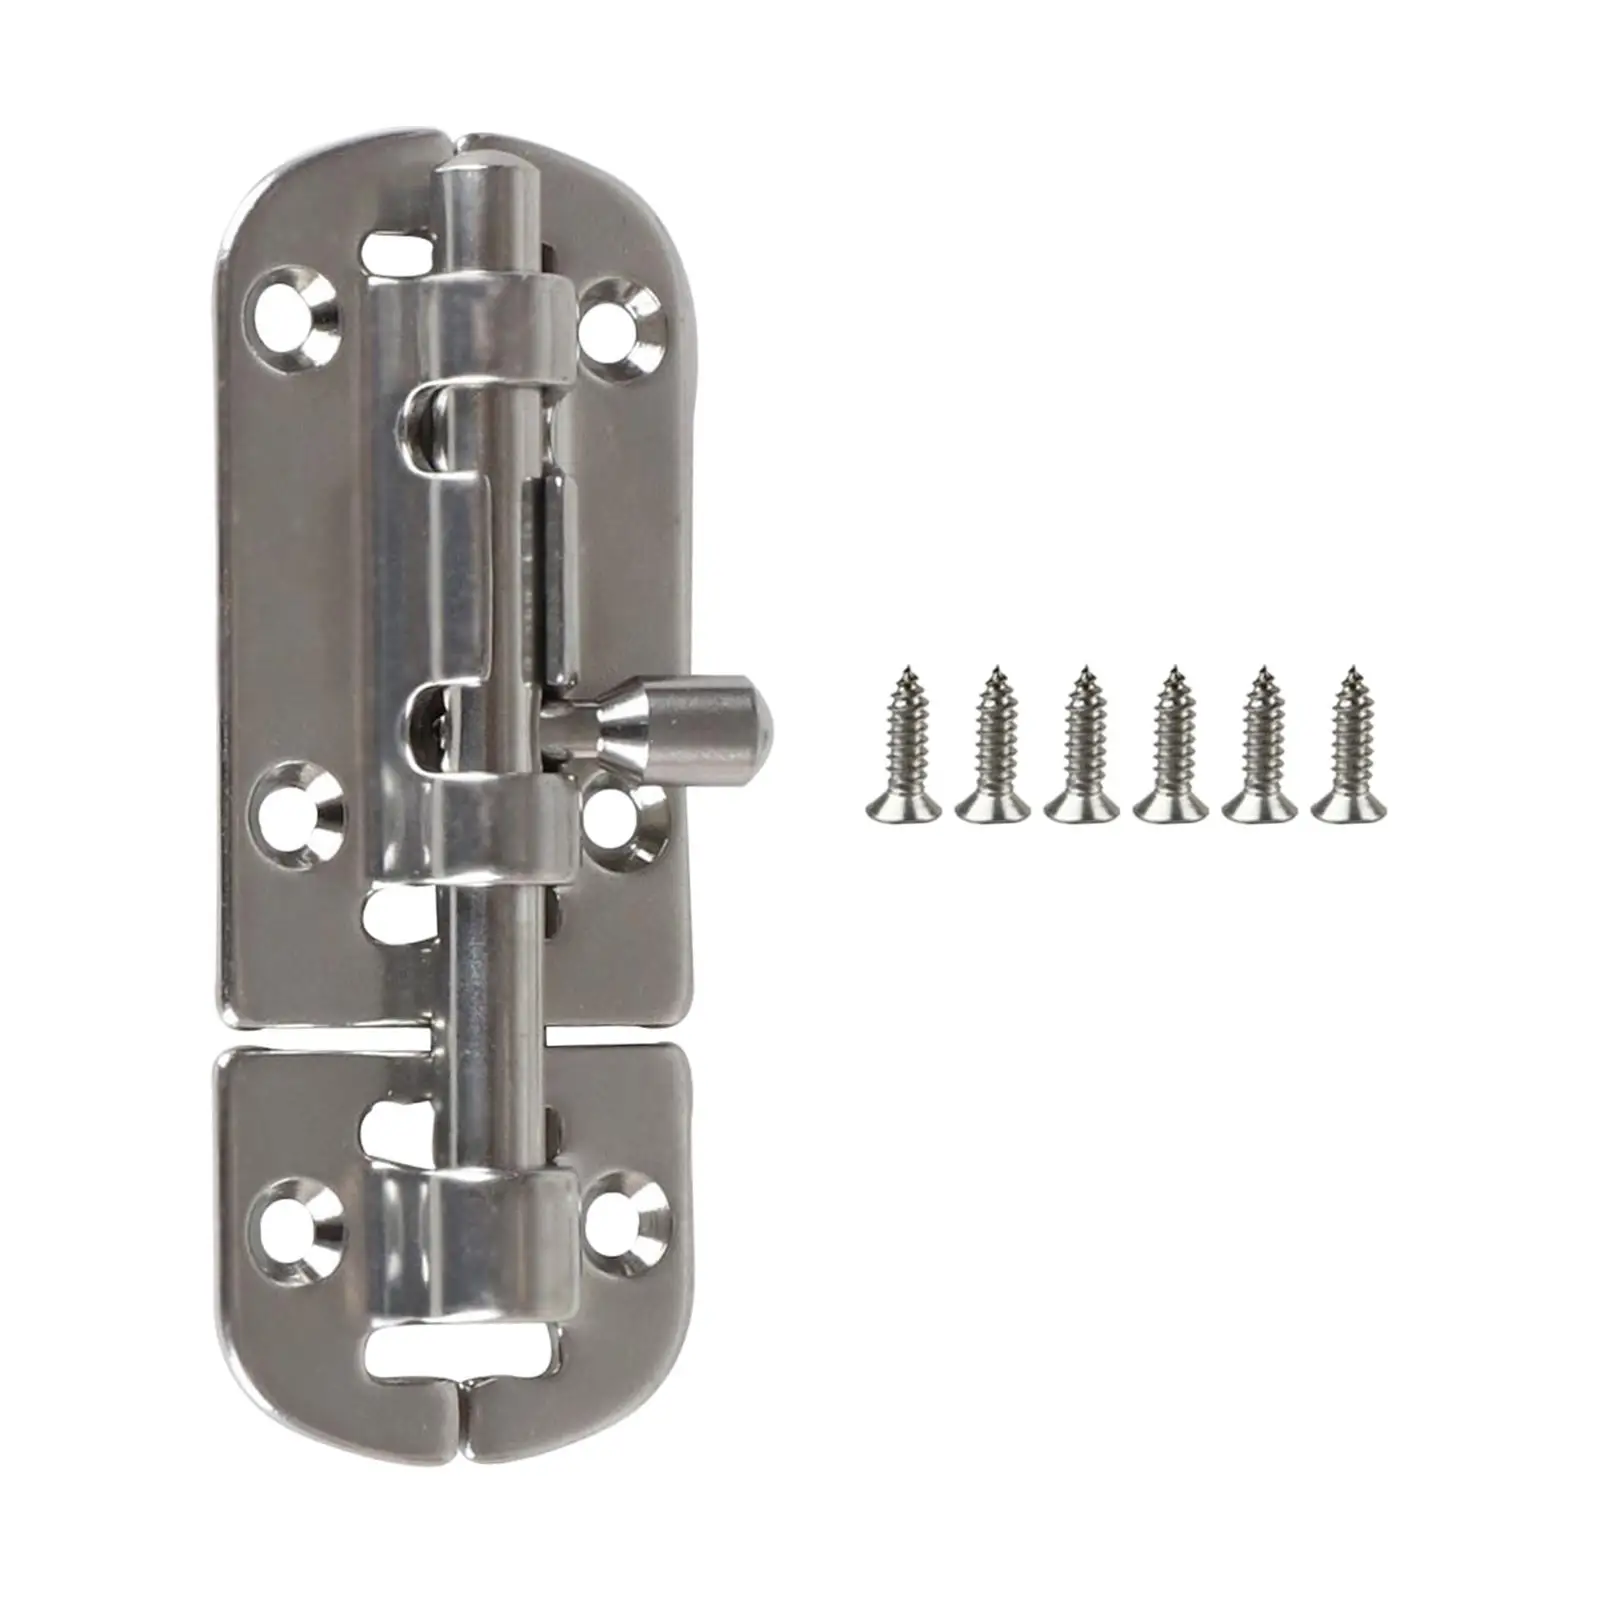 Boat Door Lock Latch Yachts Safety Protection Hardware Accessories Heavy Duty